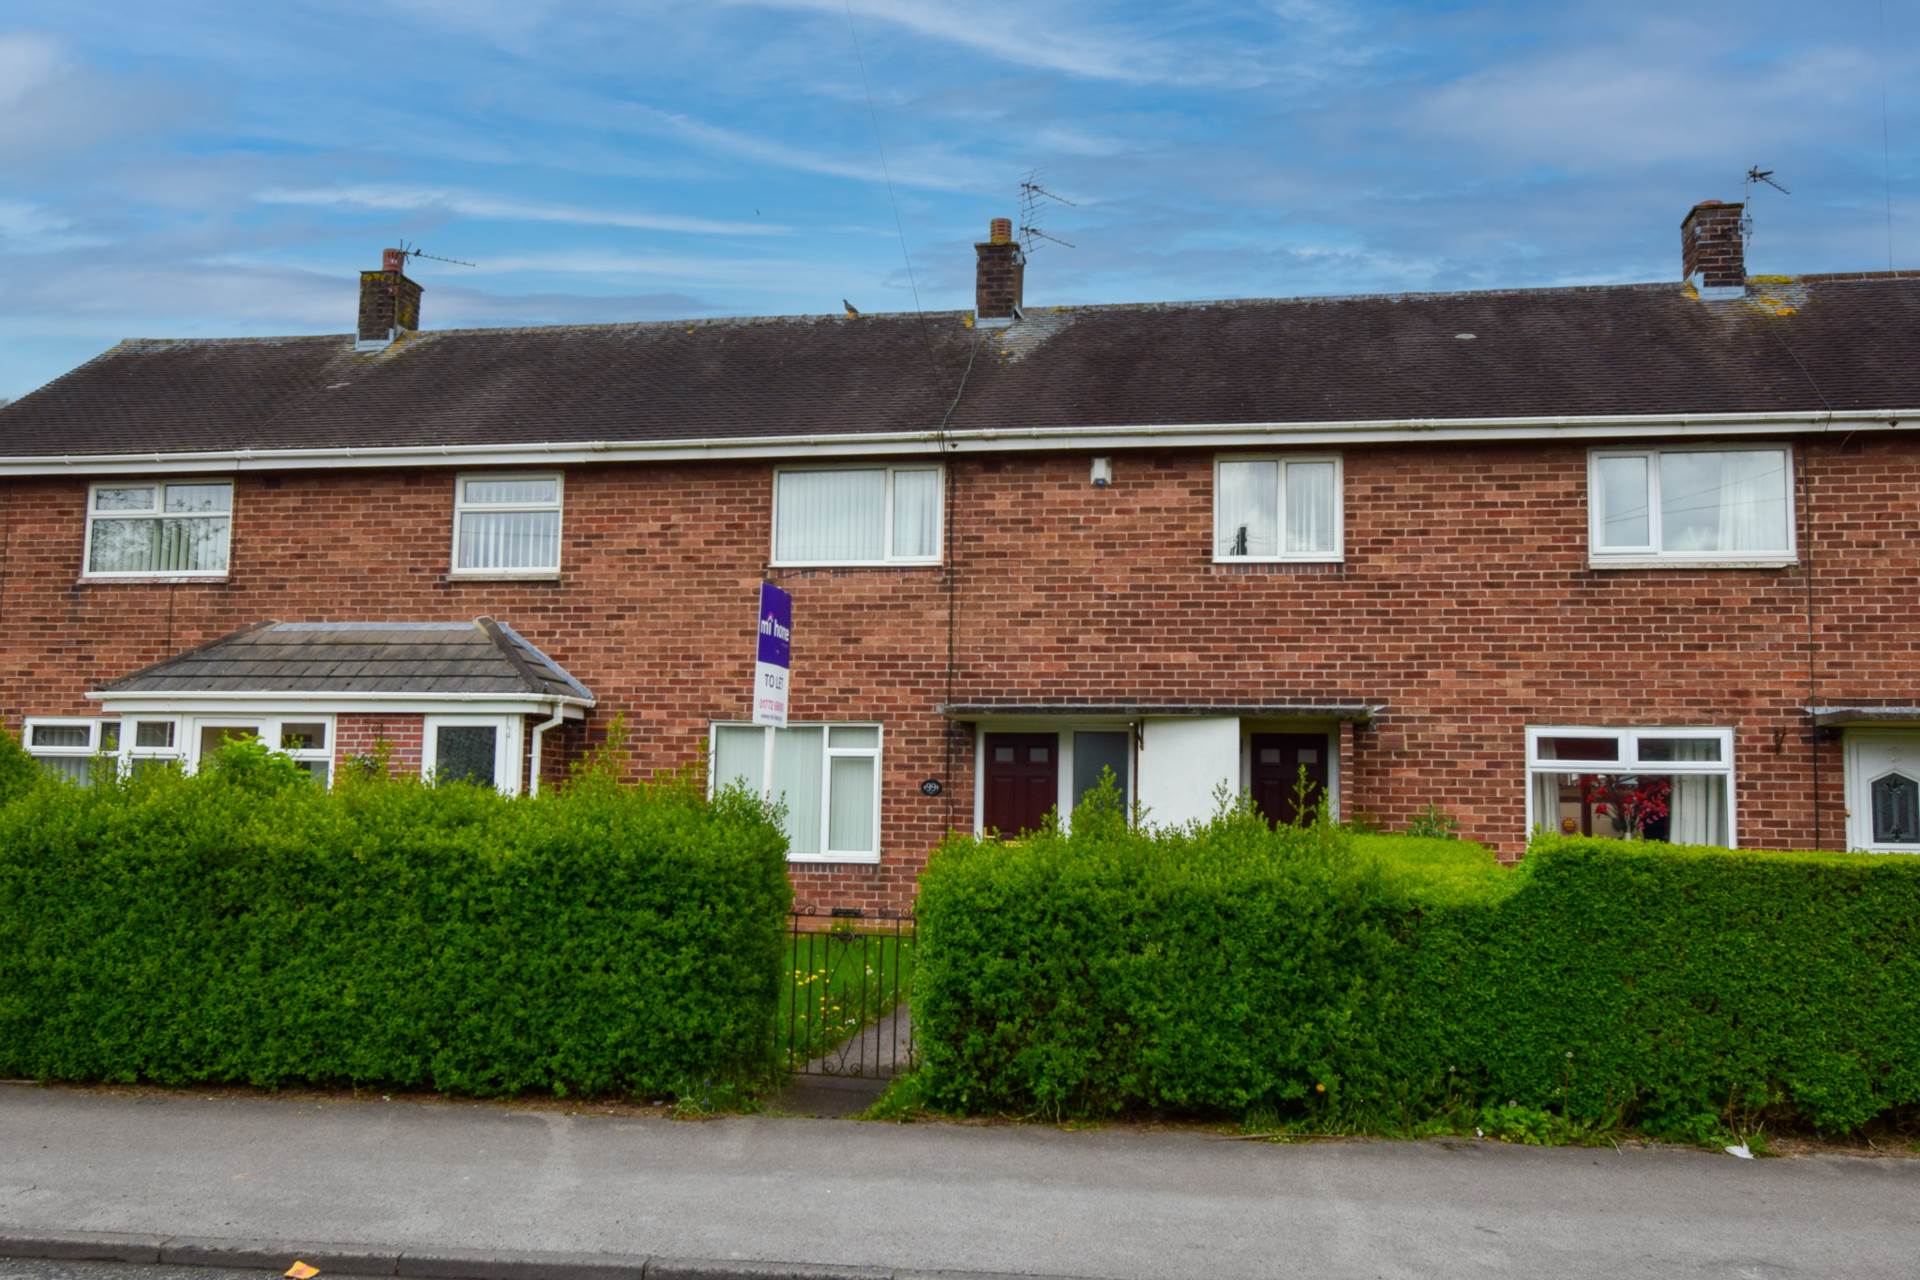 3 bed Mid Terraced House for rent in Preston. From Mi Home Estate Agents